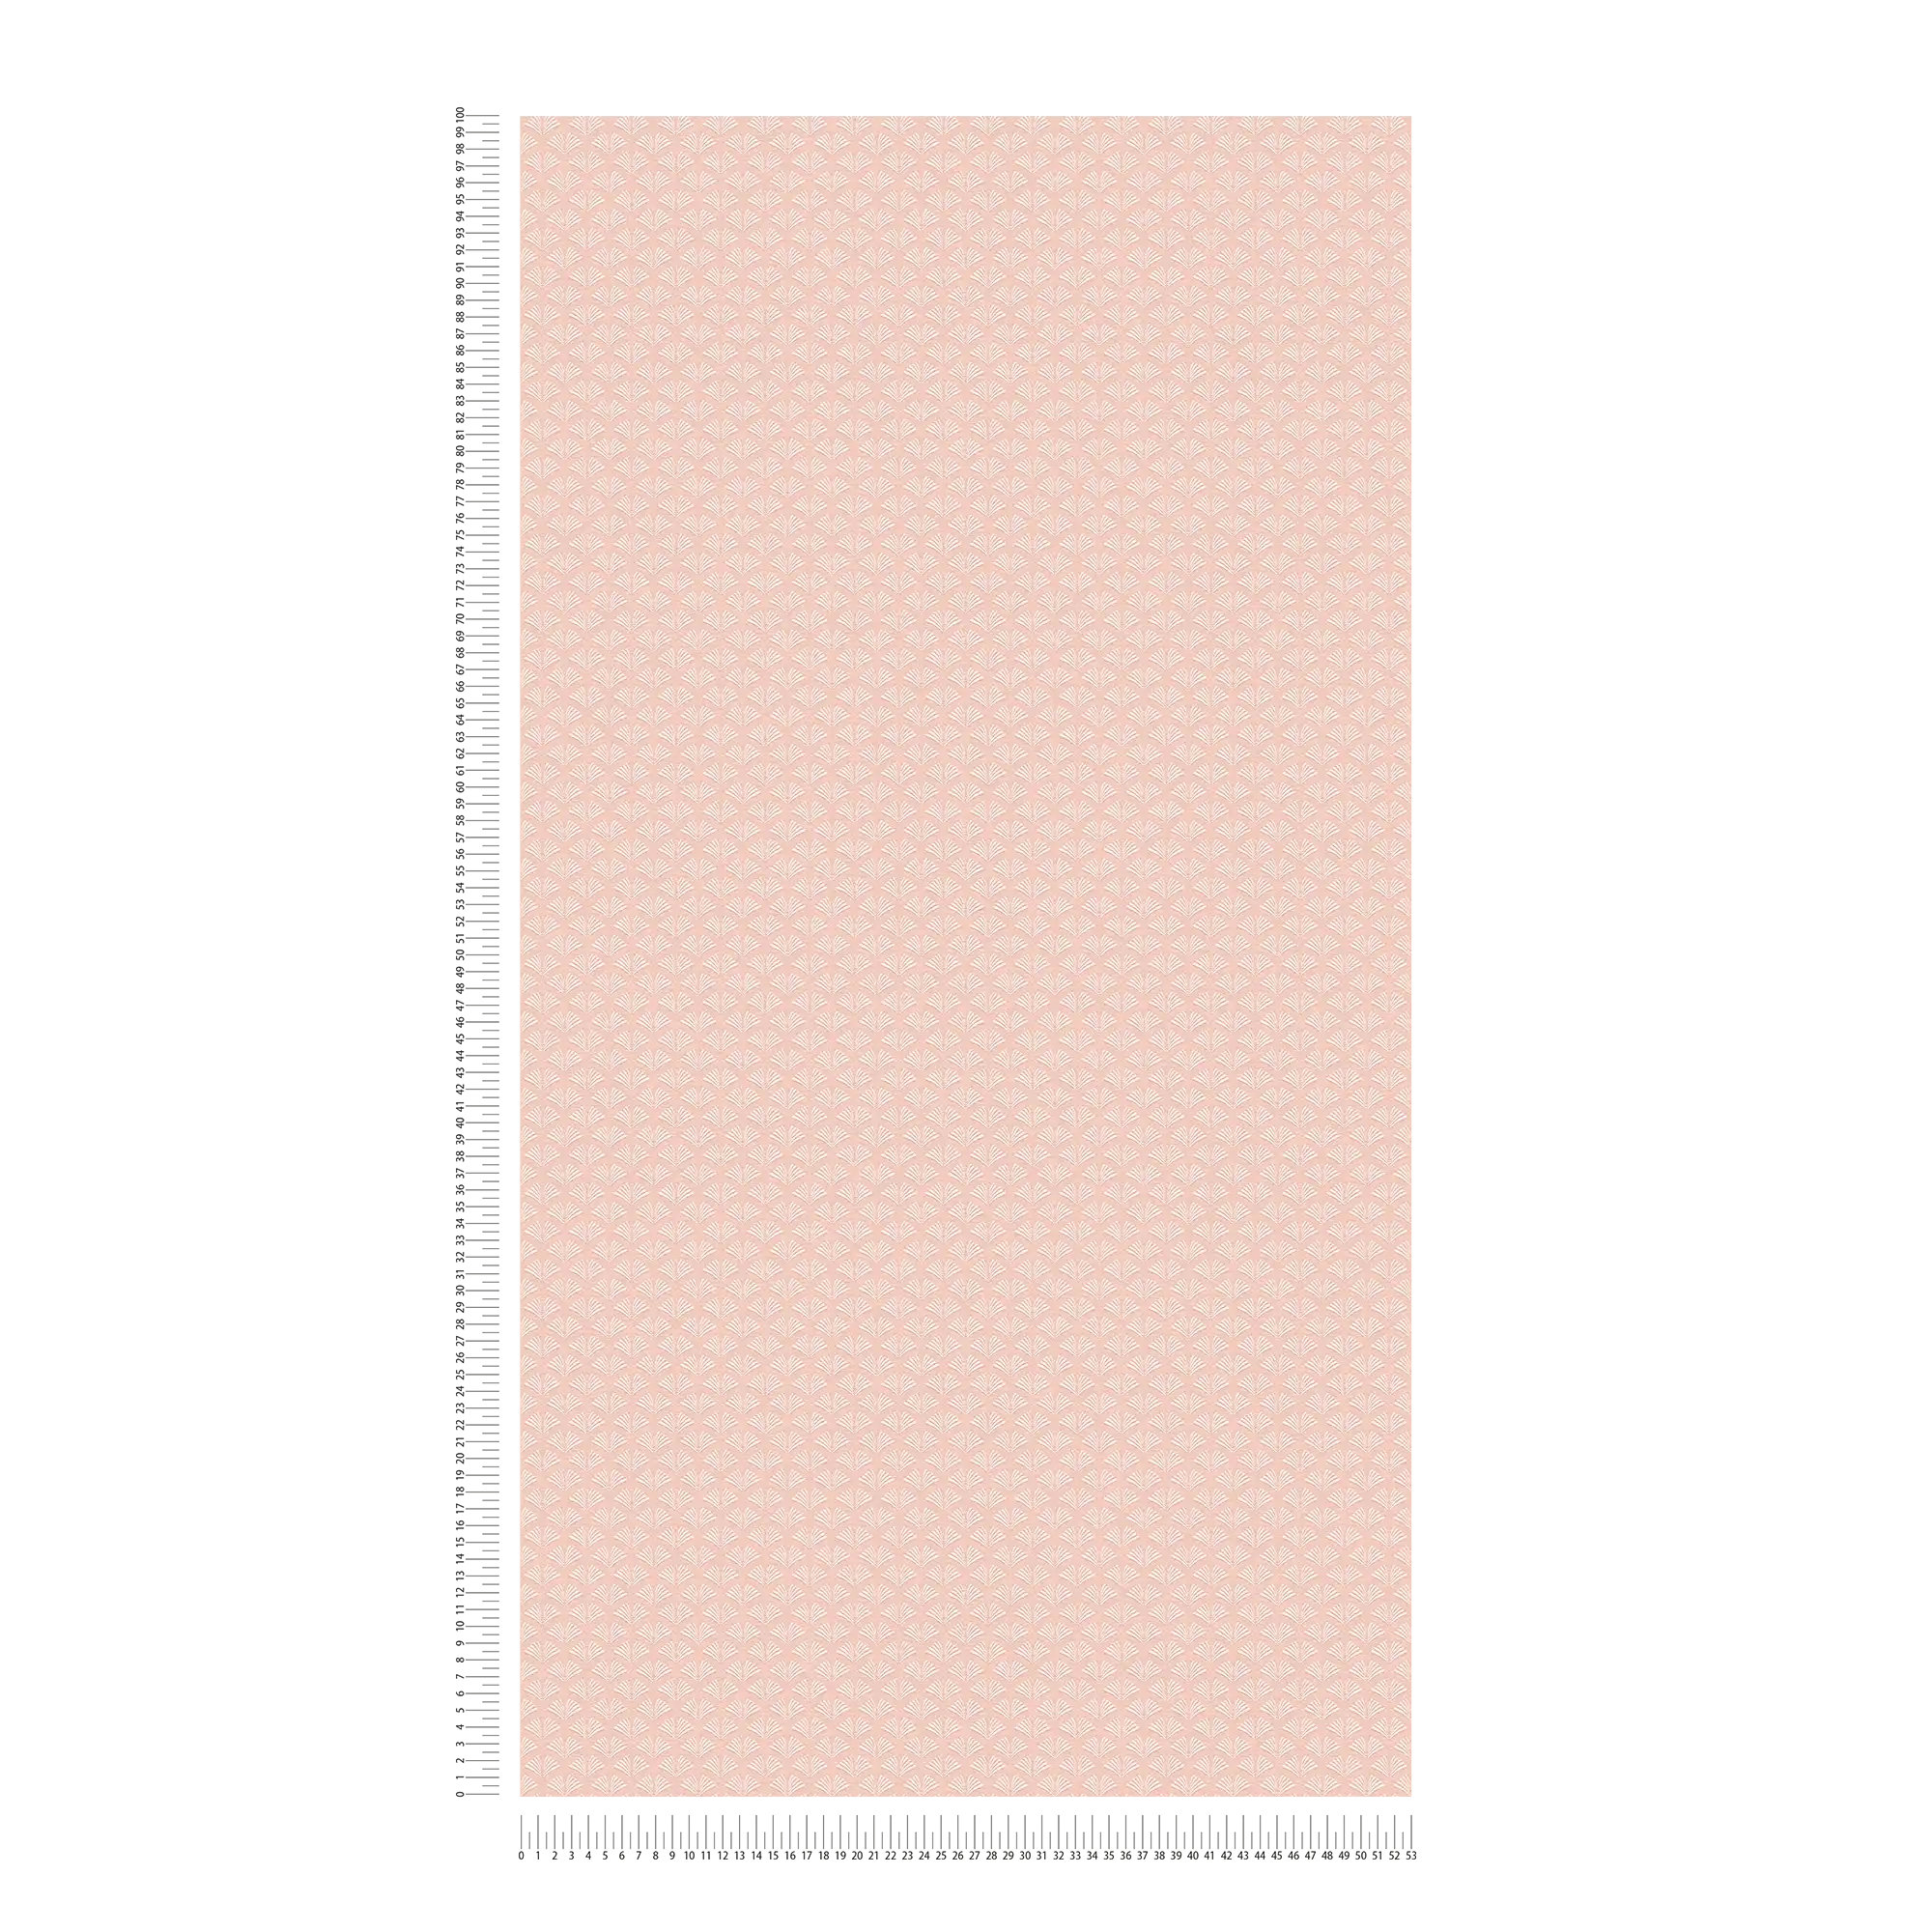             Pink non-woven wallpaper with white filigree pattern in feminine look
        